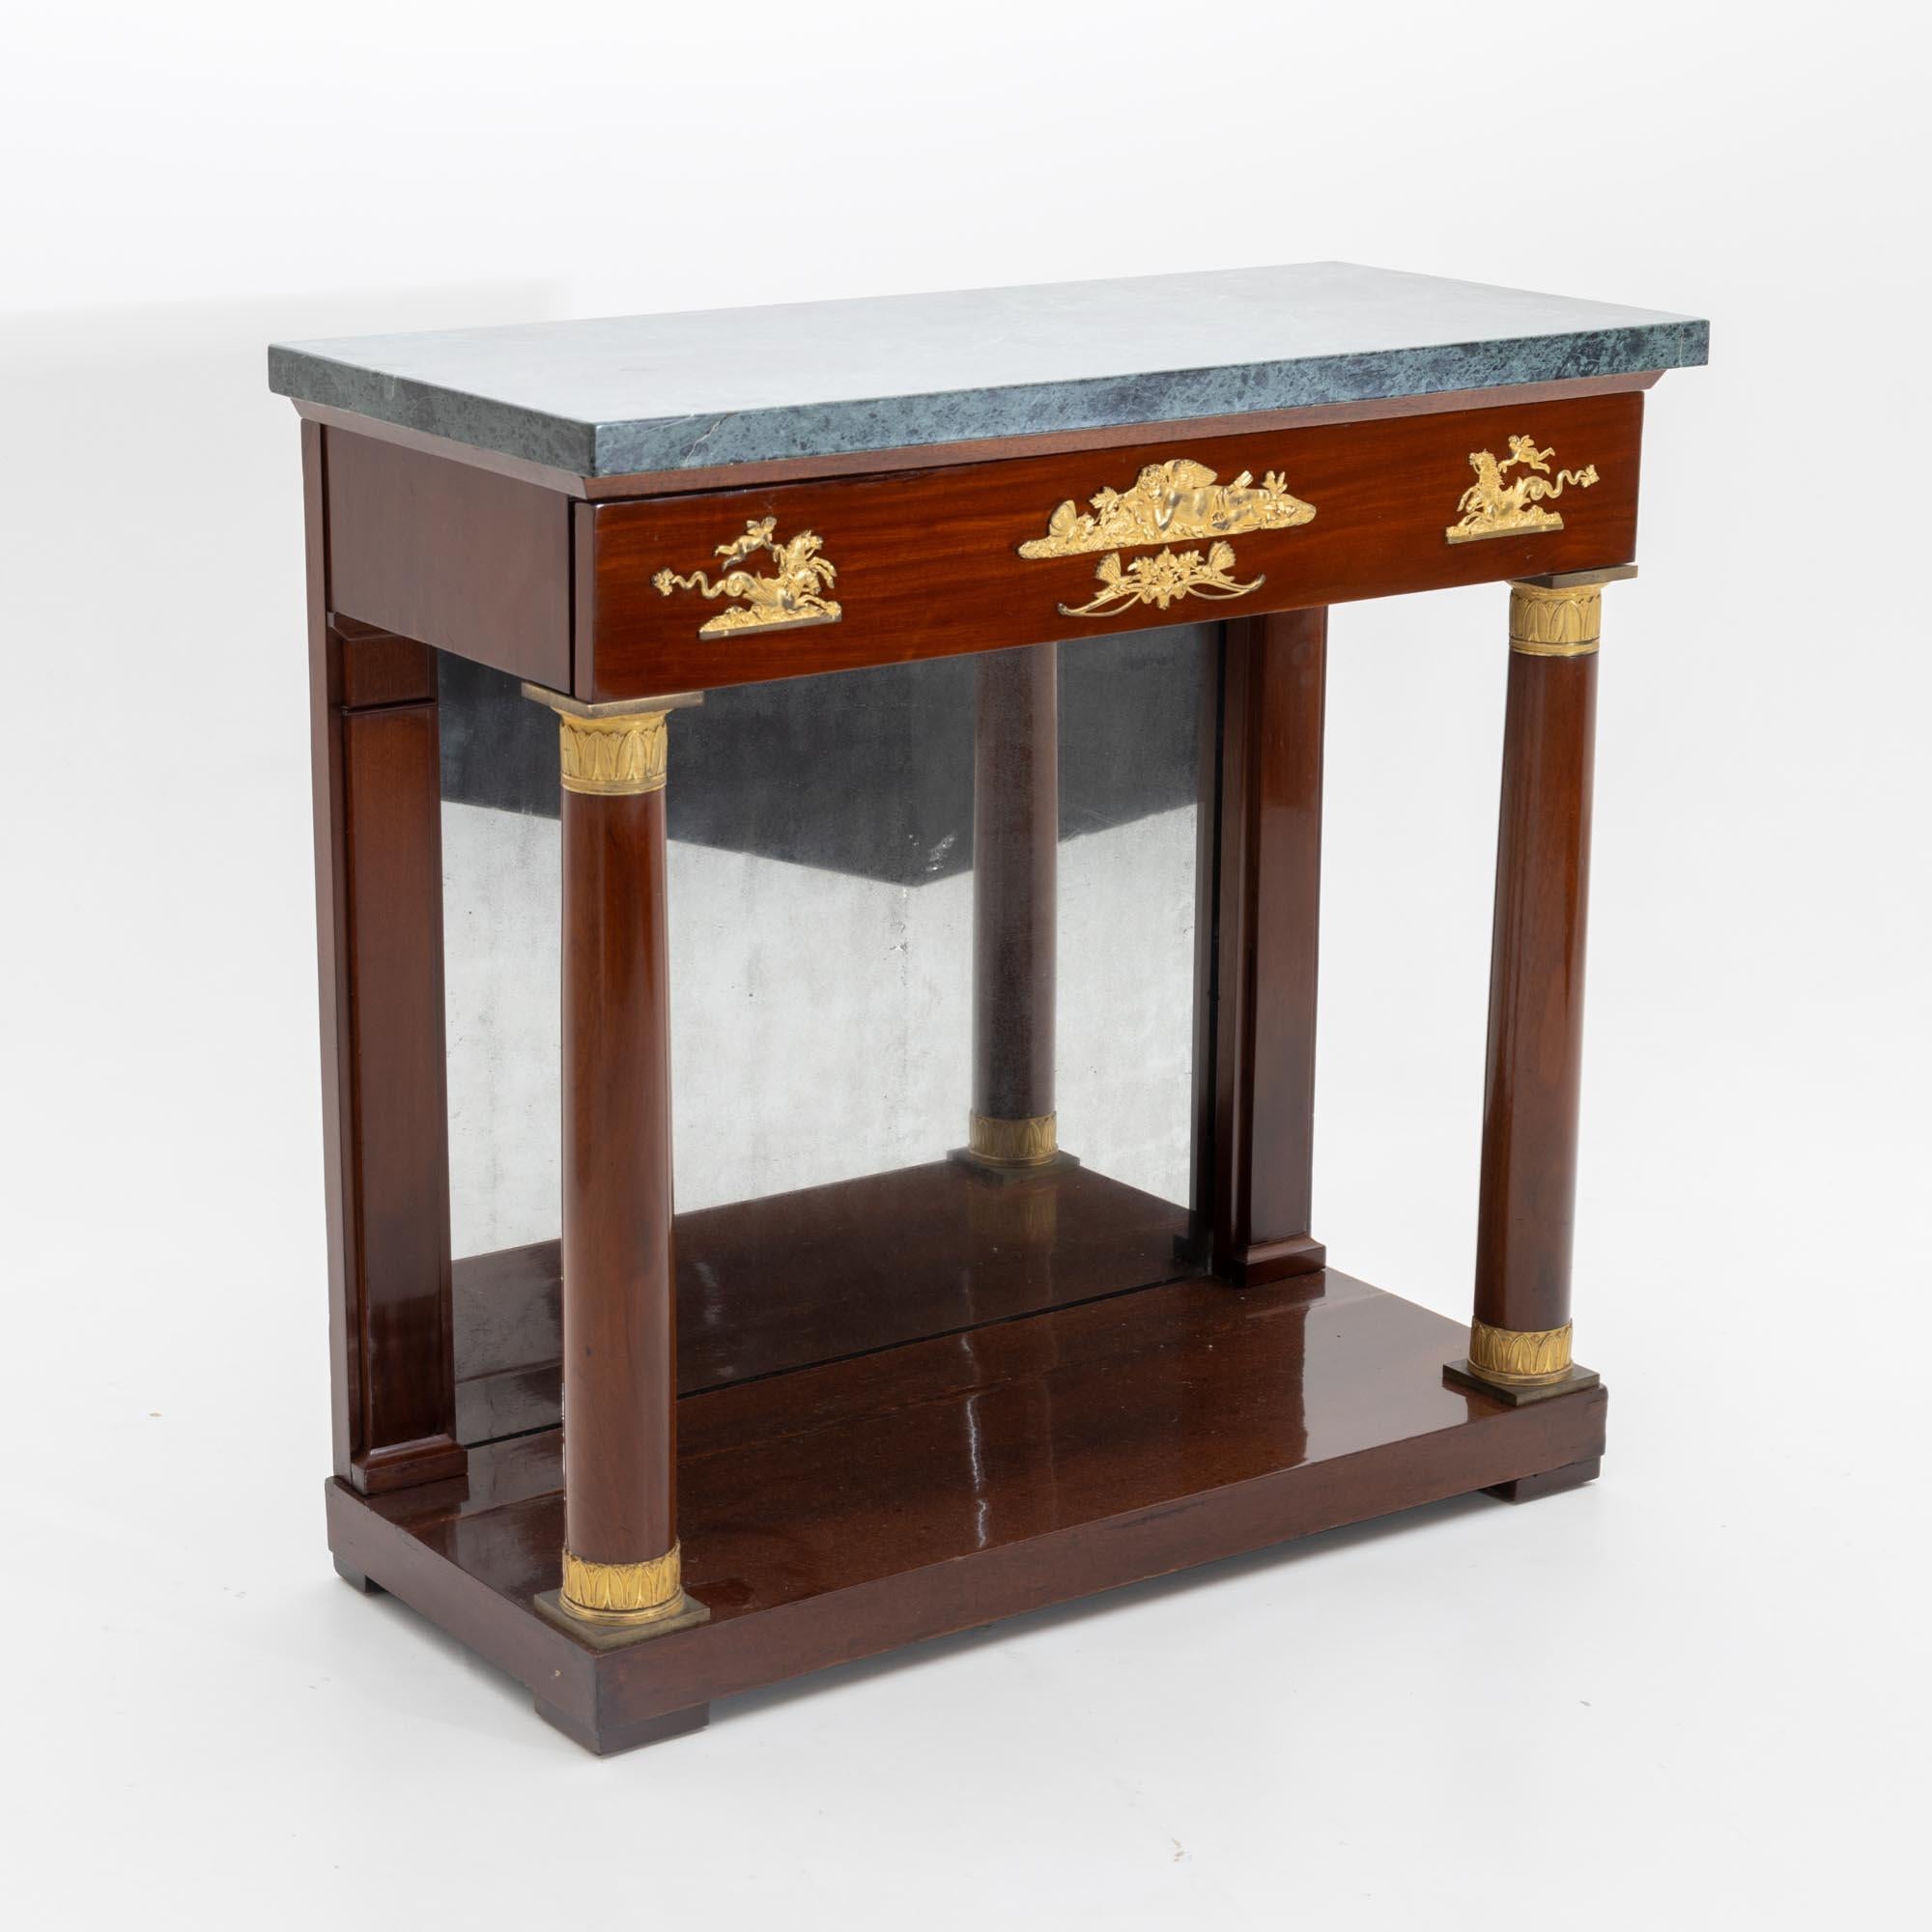 Empire wall console in mahogany veneer, with one drawer and dark green marble top. The console stands on a rectangular base with two flanking columns with gold-patinated capitals and bases. The back is mirrored and the front of the drawer is